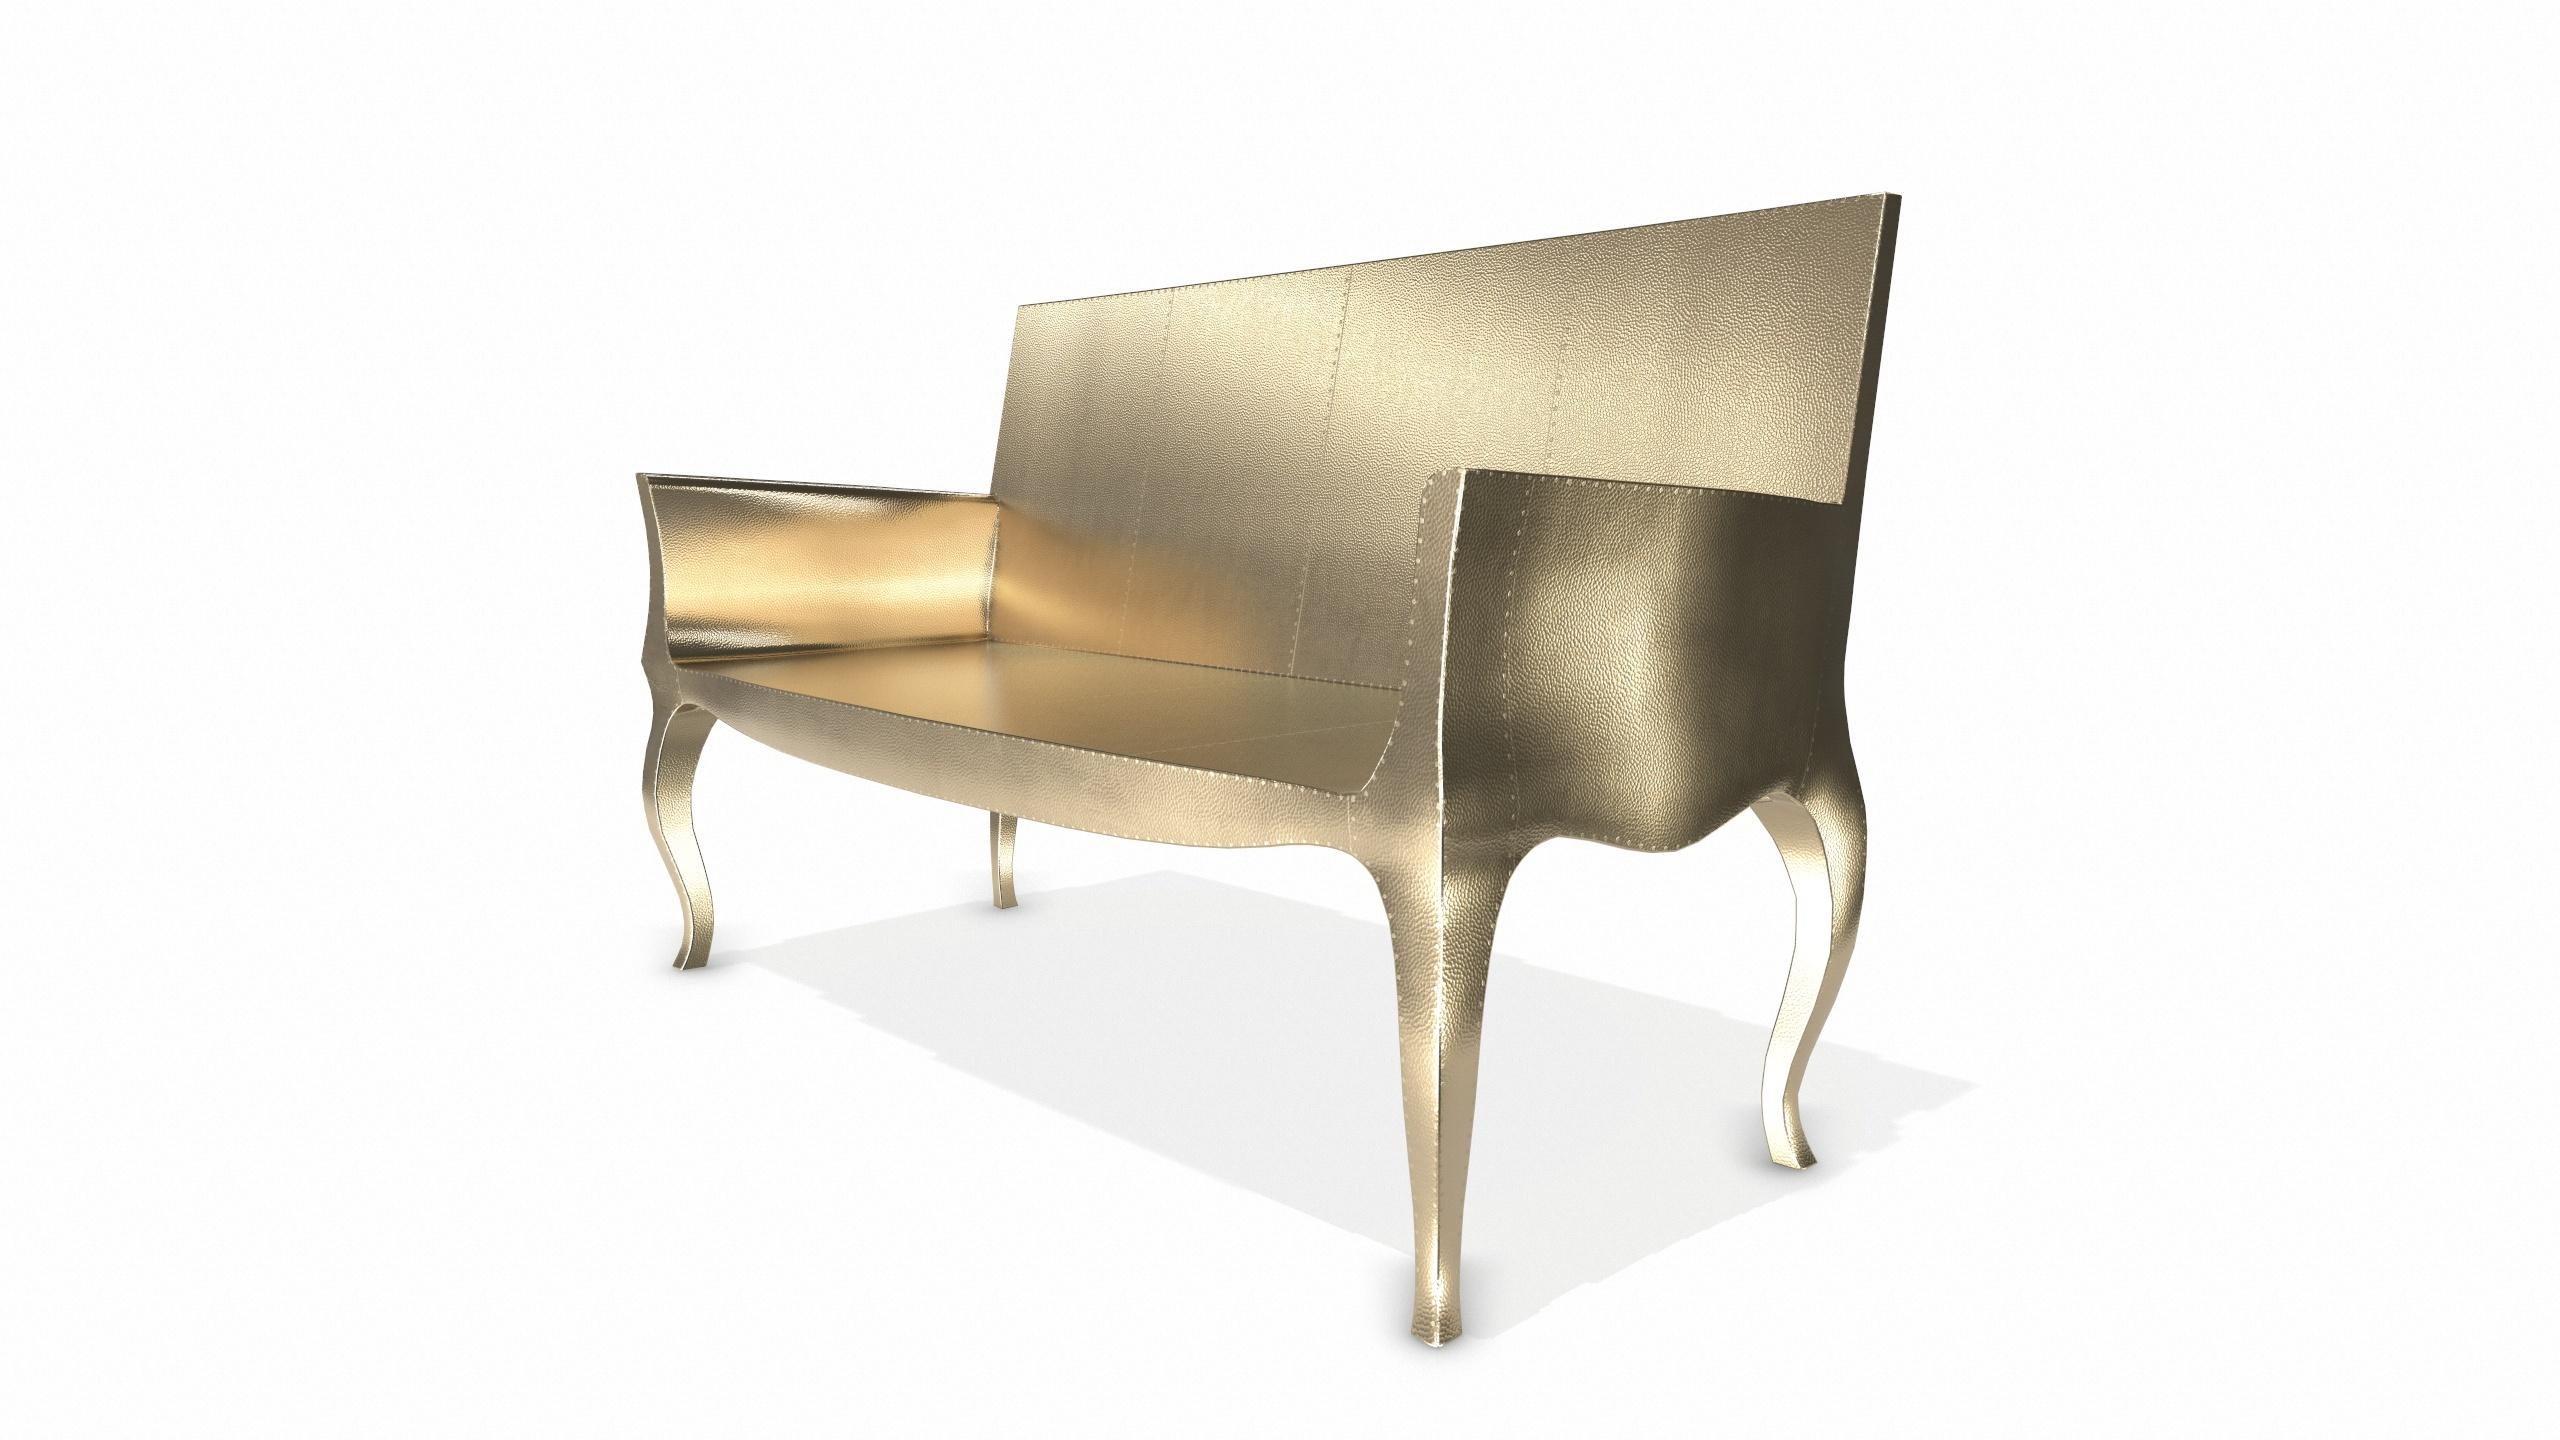 Hand-Crafted Louise Settee Art Deco Canapes in Mid. Hammered Brass by Paul Mathieu For Sale